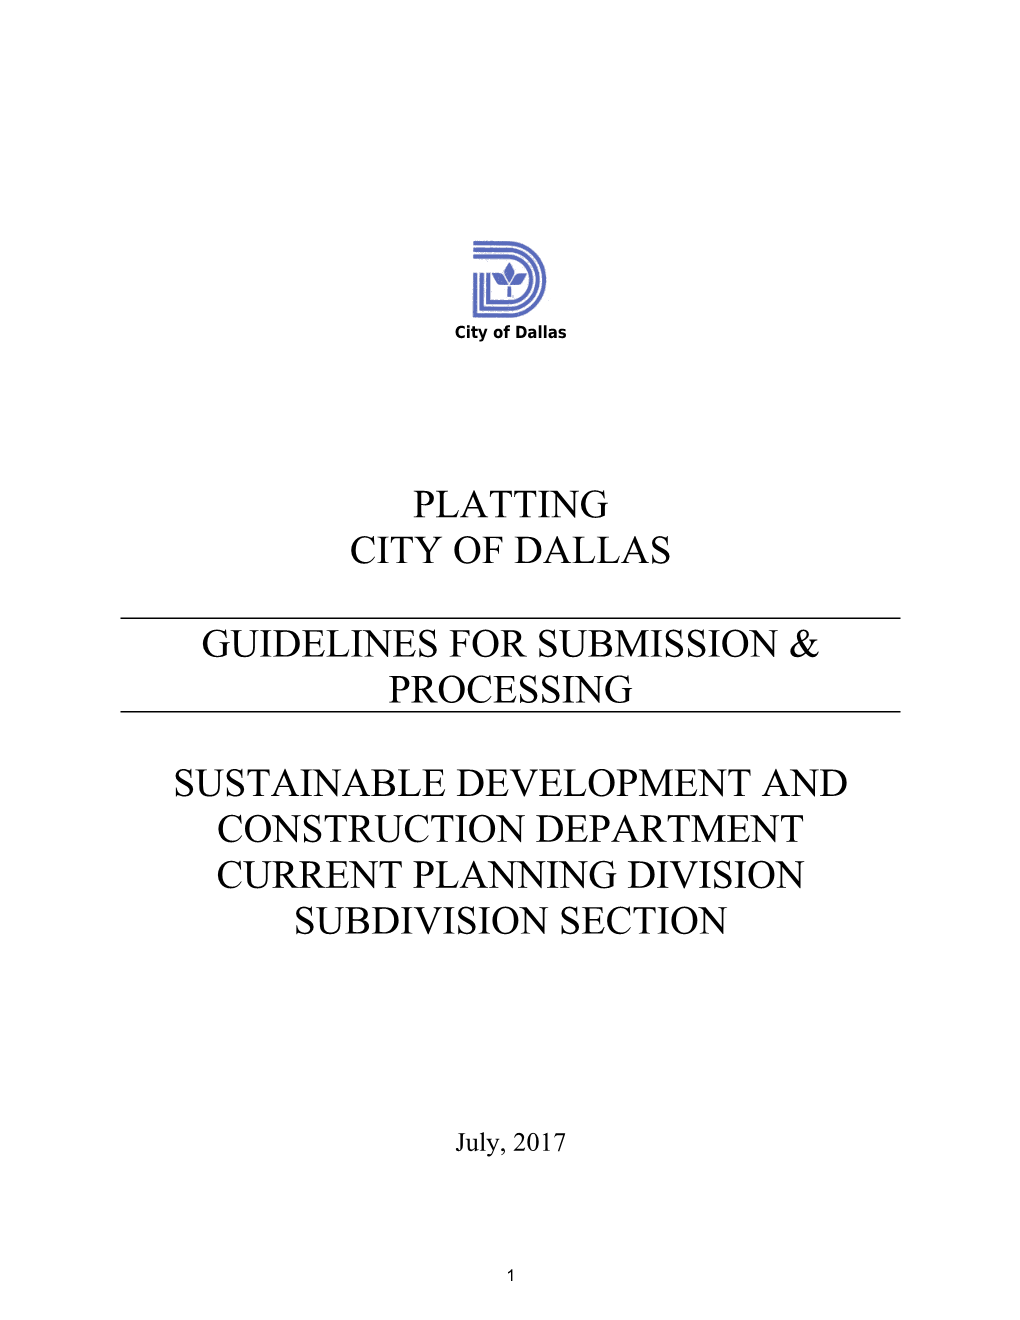 Guidelines for Submission & Processing